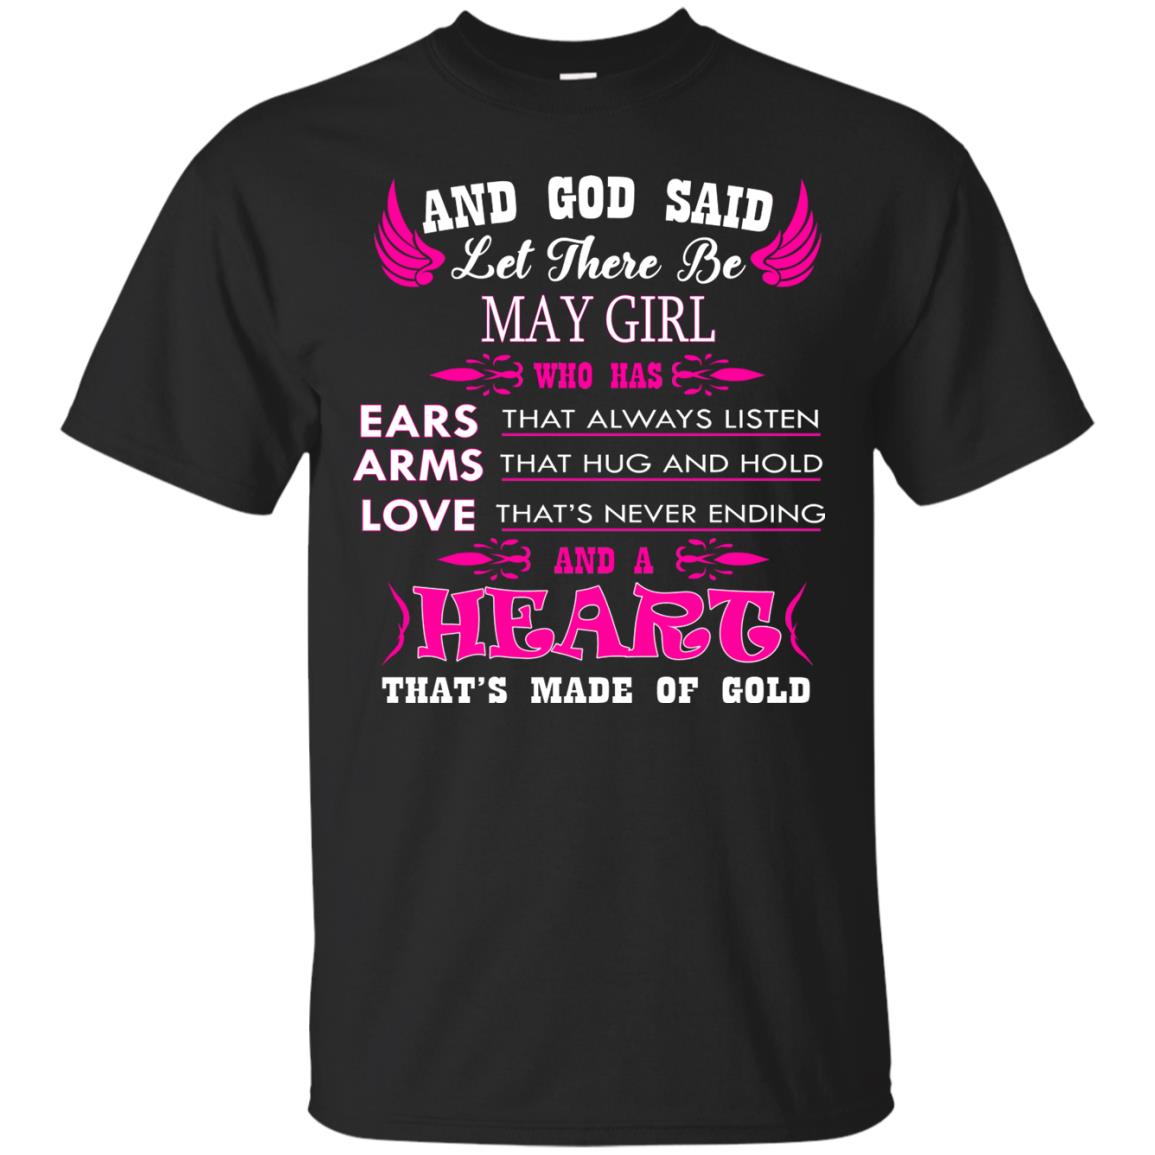 And God Said Let There Be May Girl Who Has Ears - Arms - Love Shirt